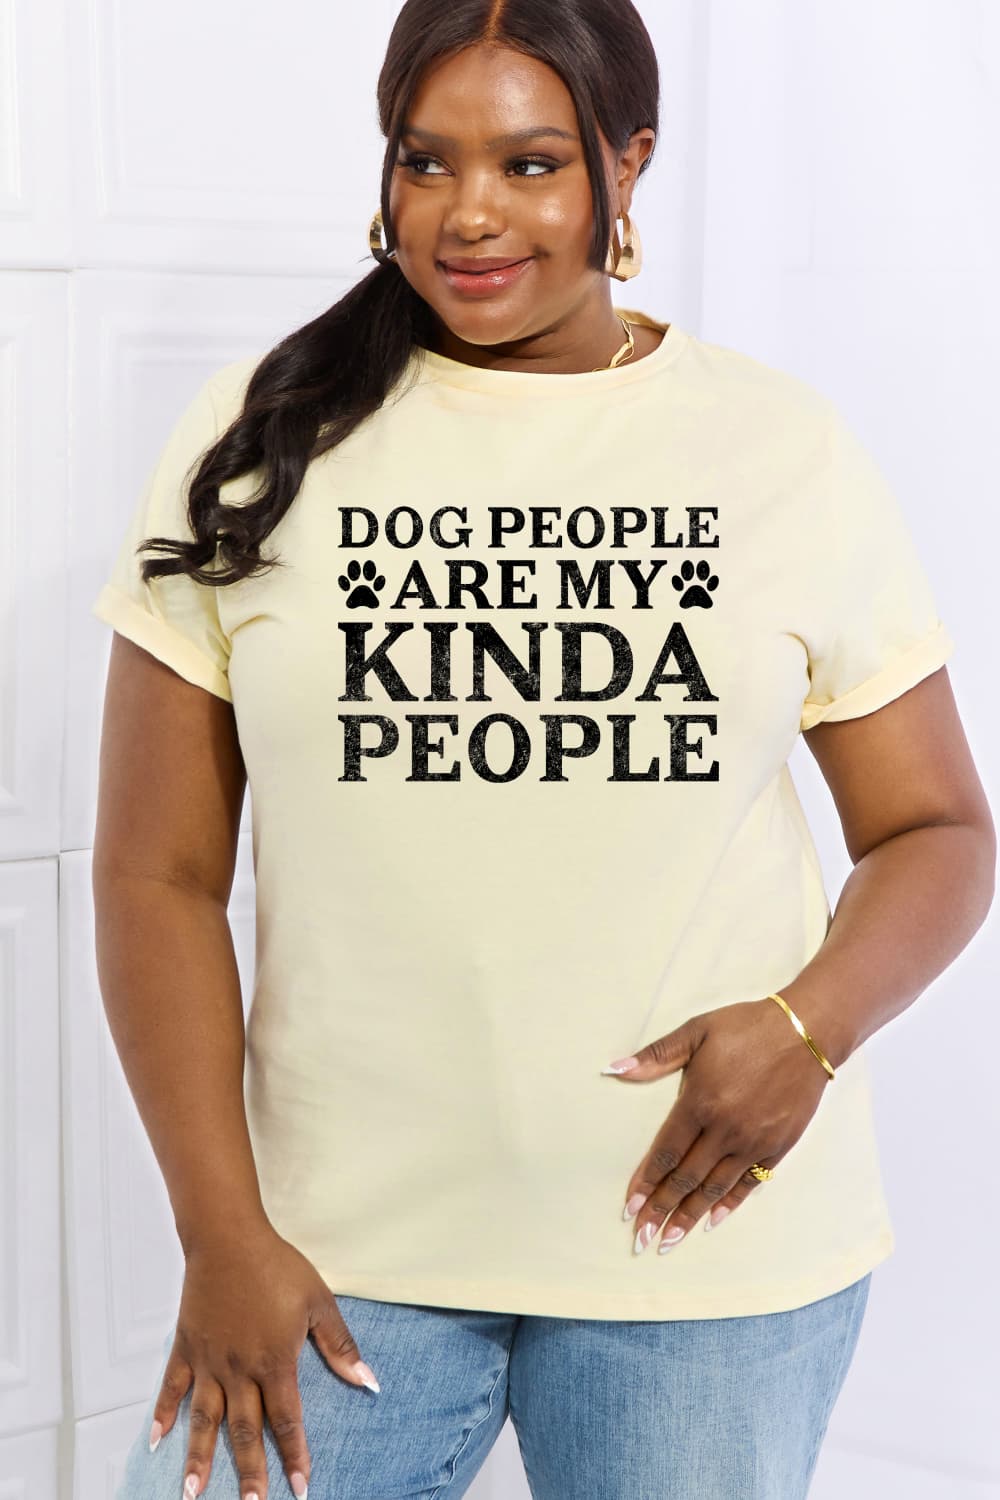 DOG PEOPLE ARE MY KINDA PEOPLE Graphic Cotton Tee - T-Shirts - Shirts & Tops - 1 - 2024